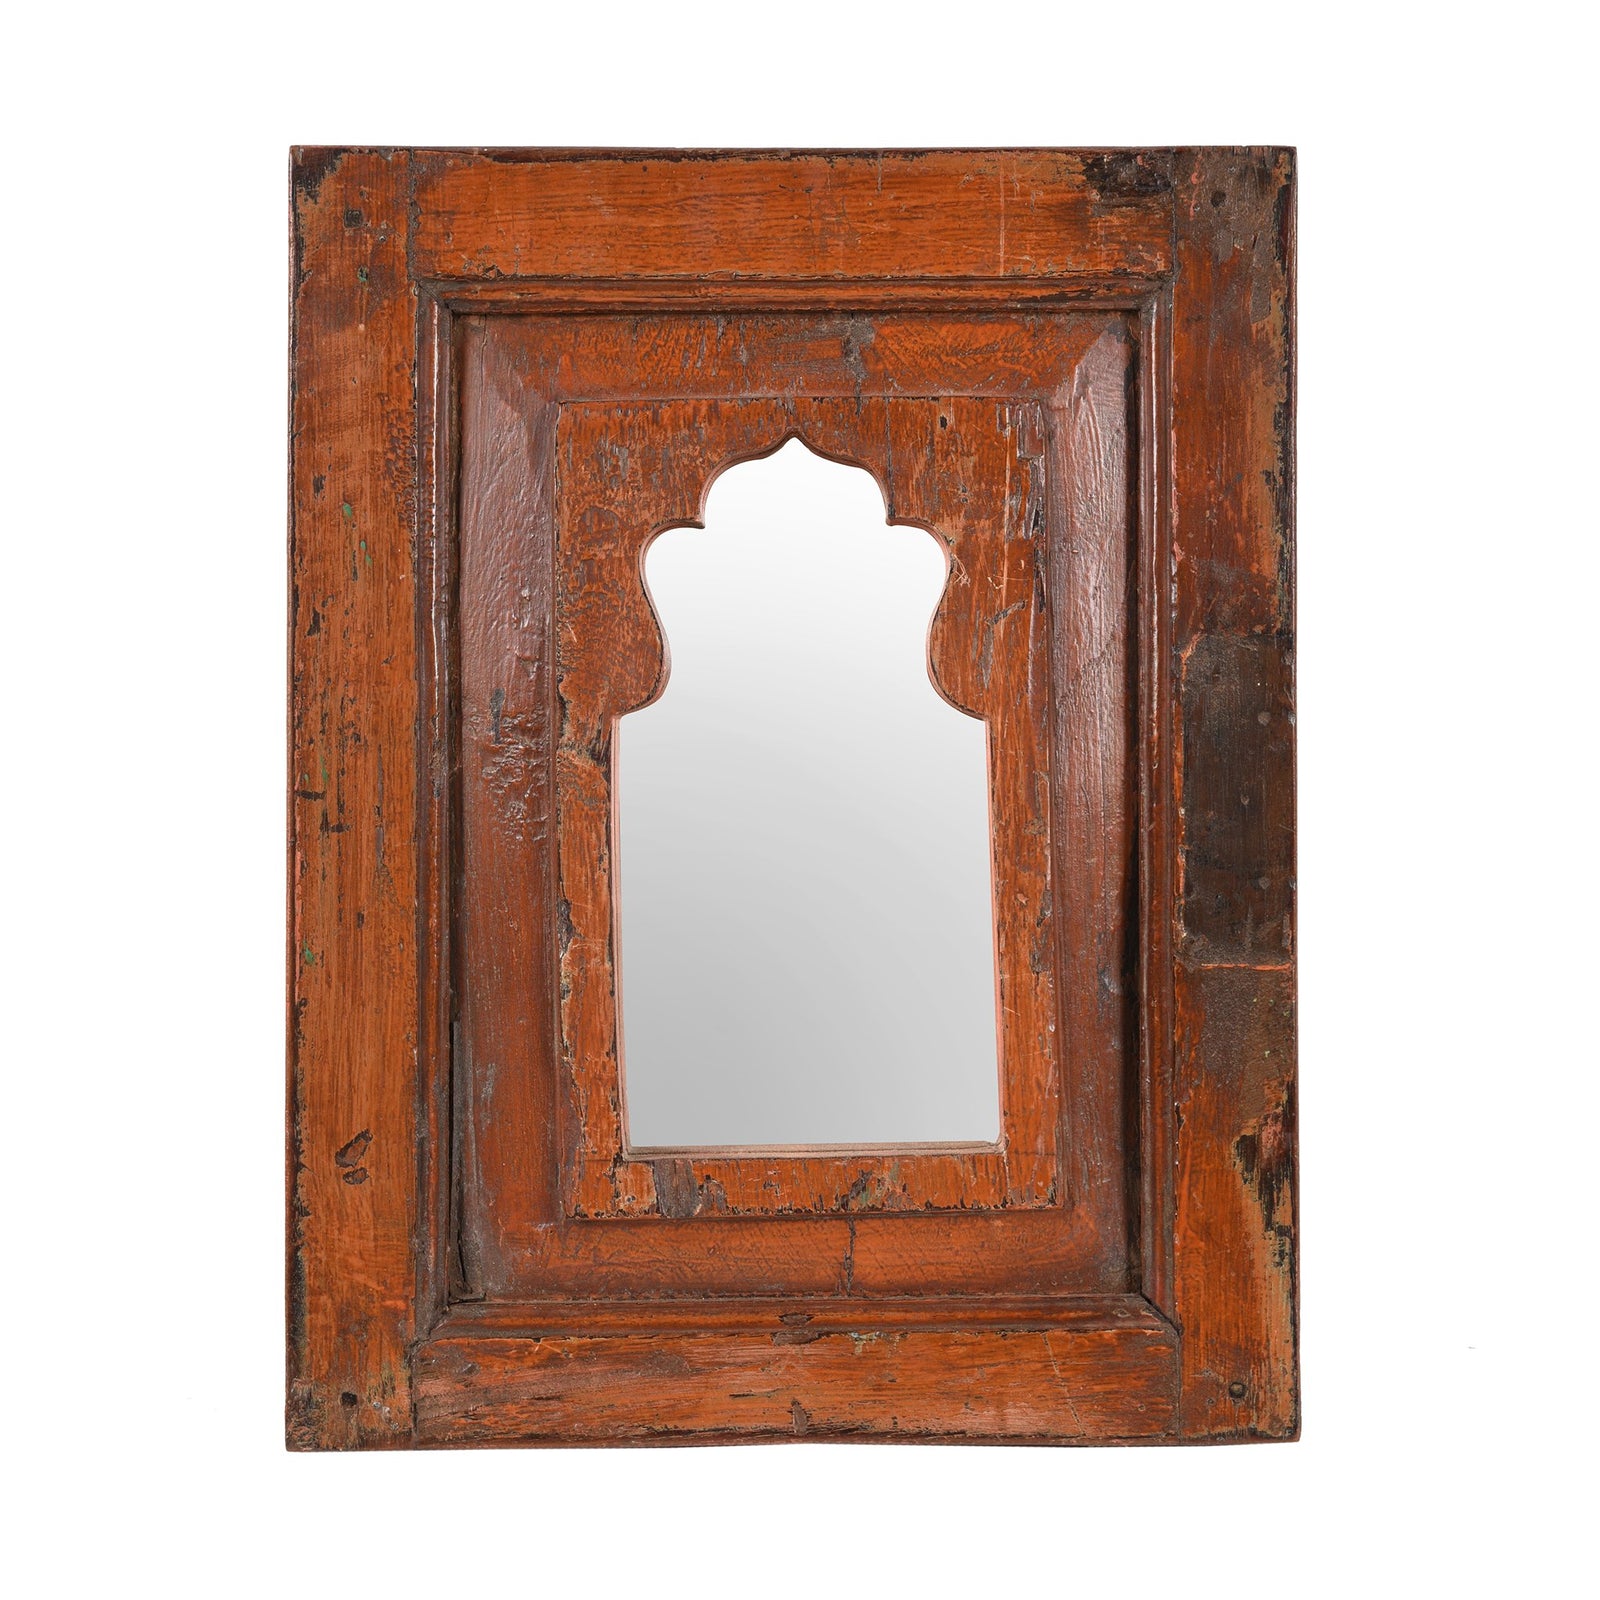 Painted Indian Mihrab Mirror Frame Made From Old Teak - 35 x 3 x 45 (wxdxh cms) - A6056V3